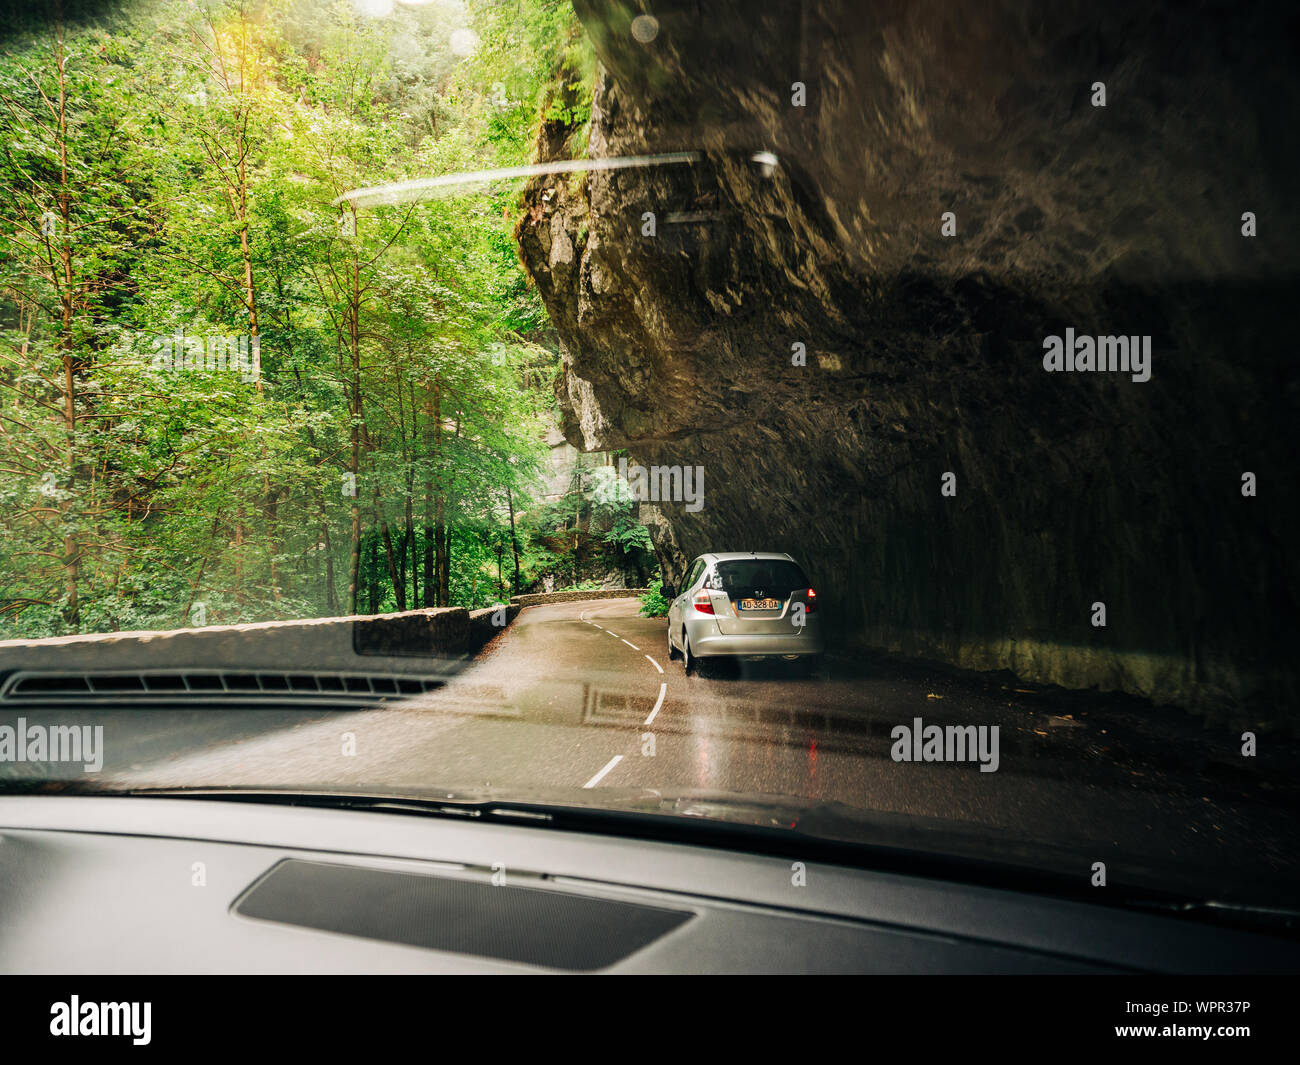 Chorance, France - Aug 11, 2017: POV from the car at the front driving Honda Jazz in Chorance in the Vercors Massif France under tall stones and fir trees Stock Photo